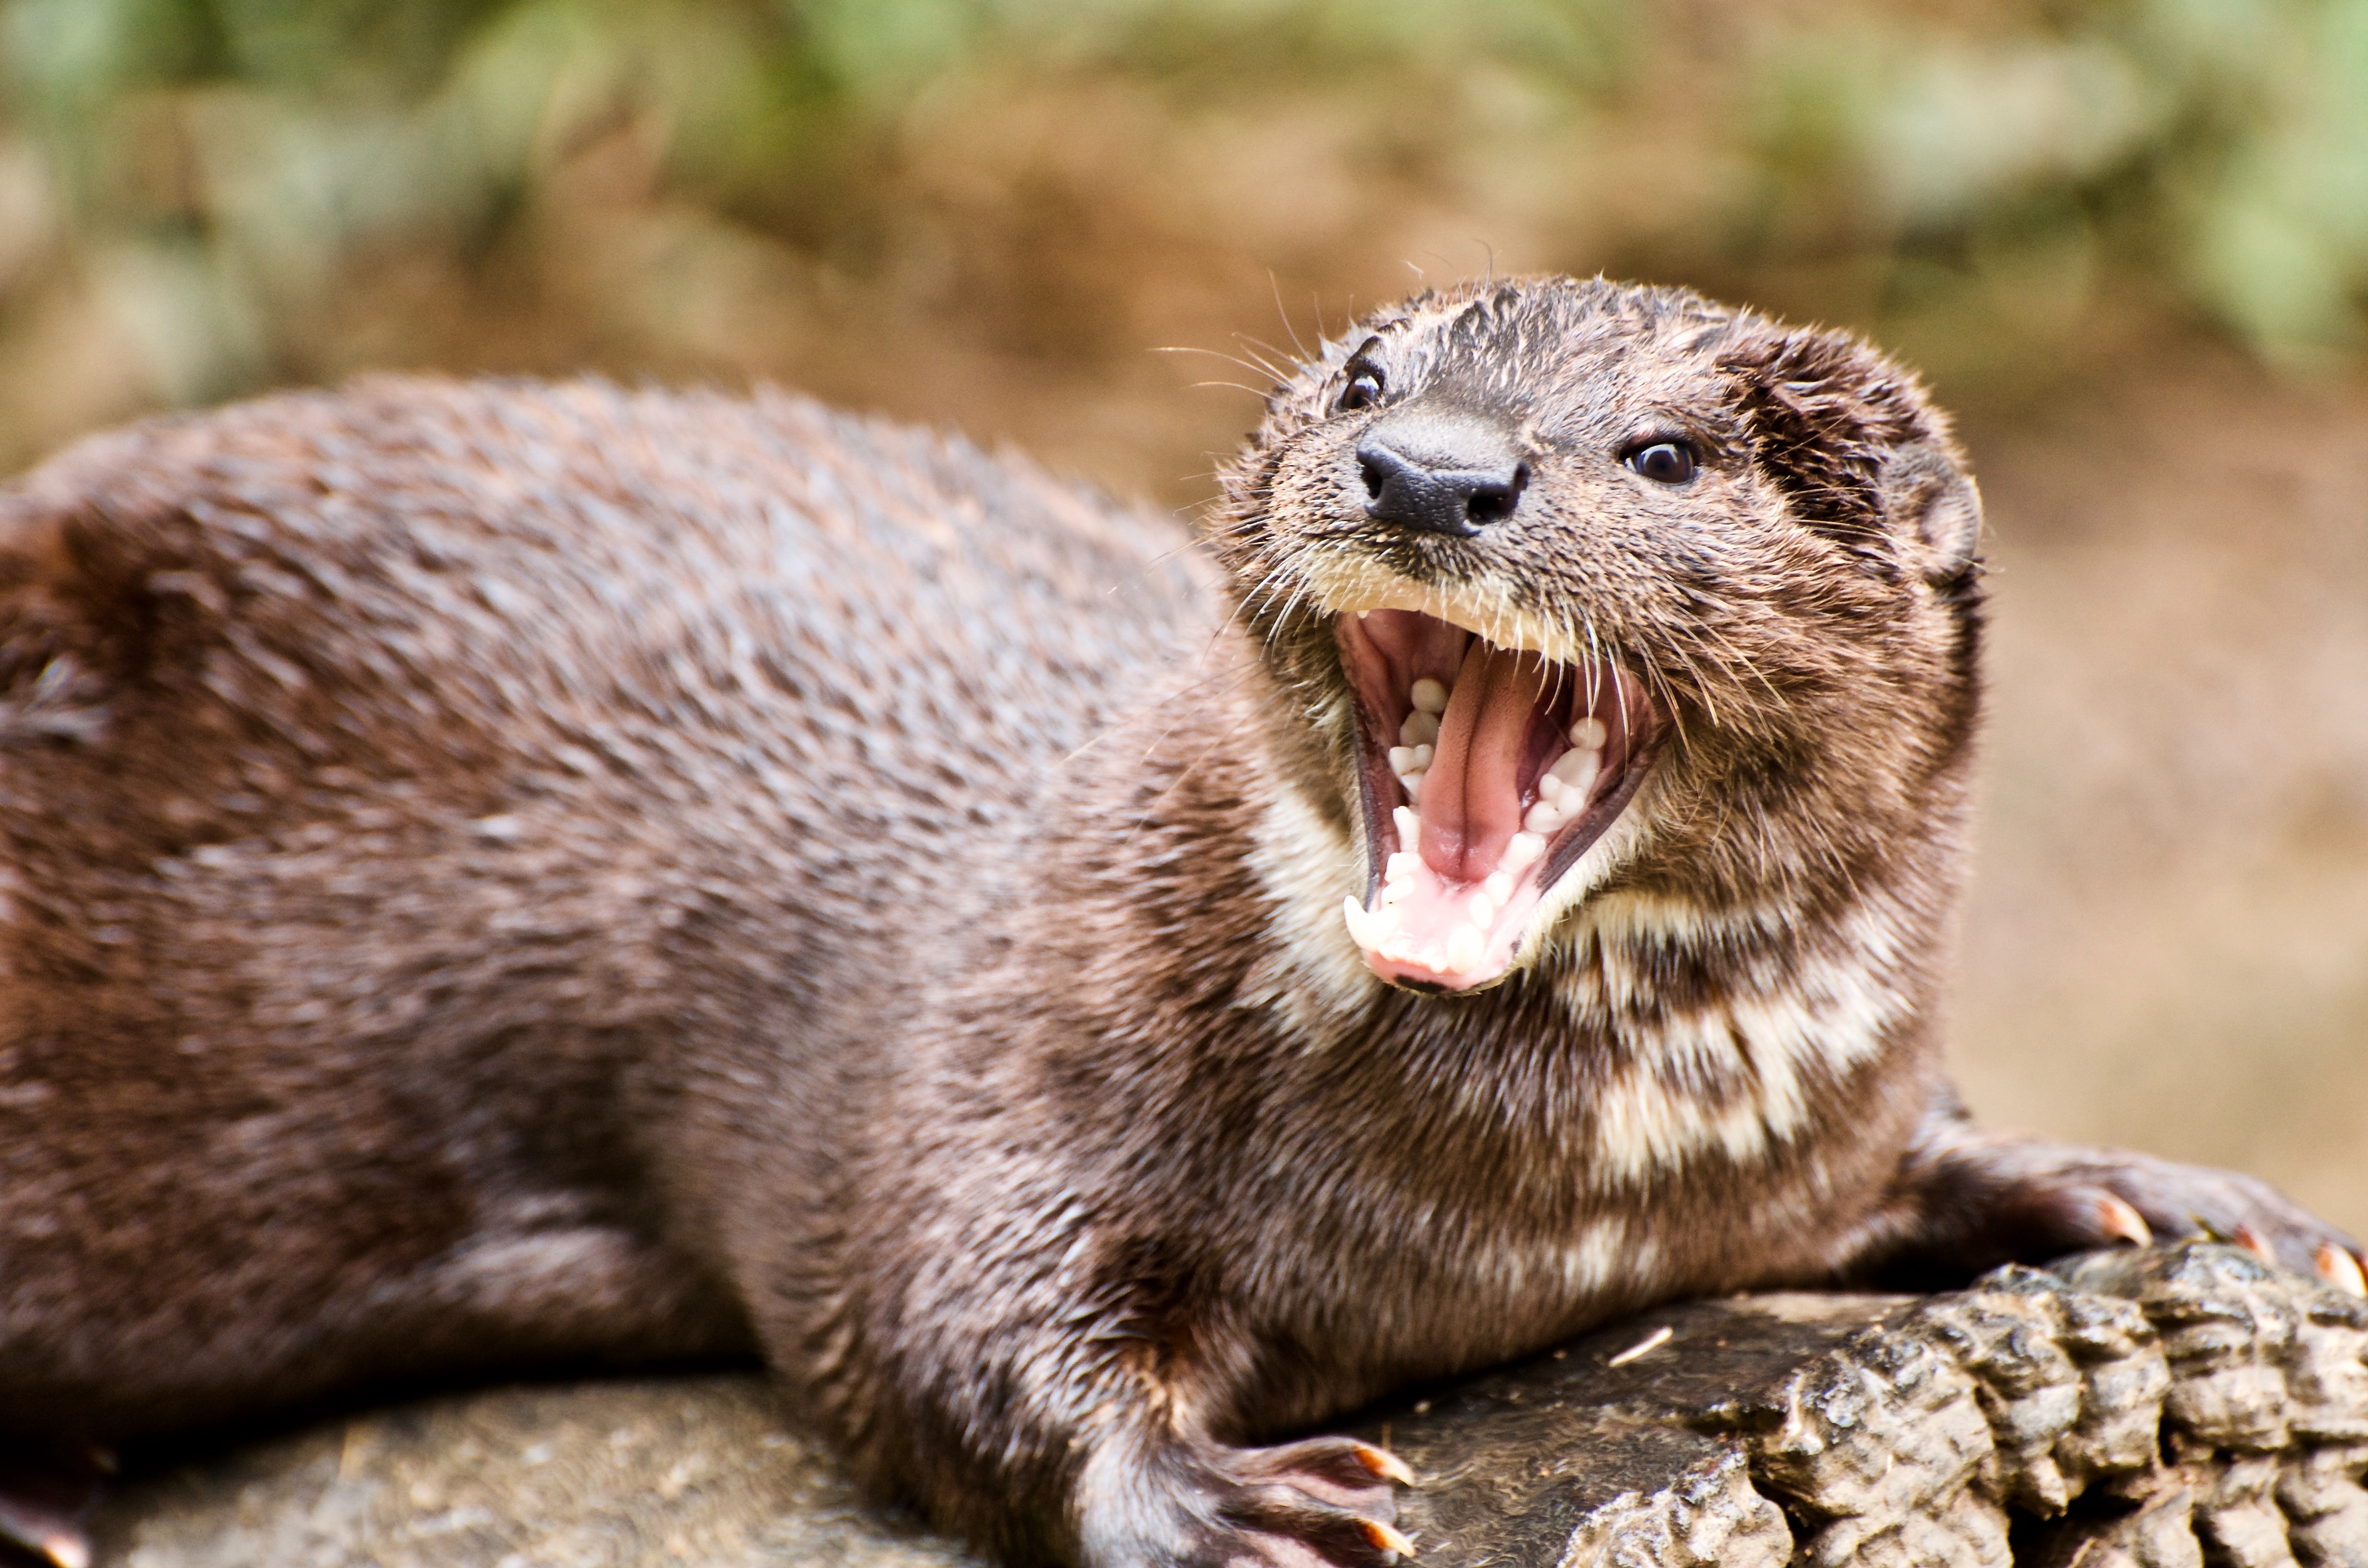 Otter opening mouth and baring teeth